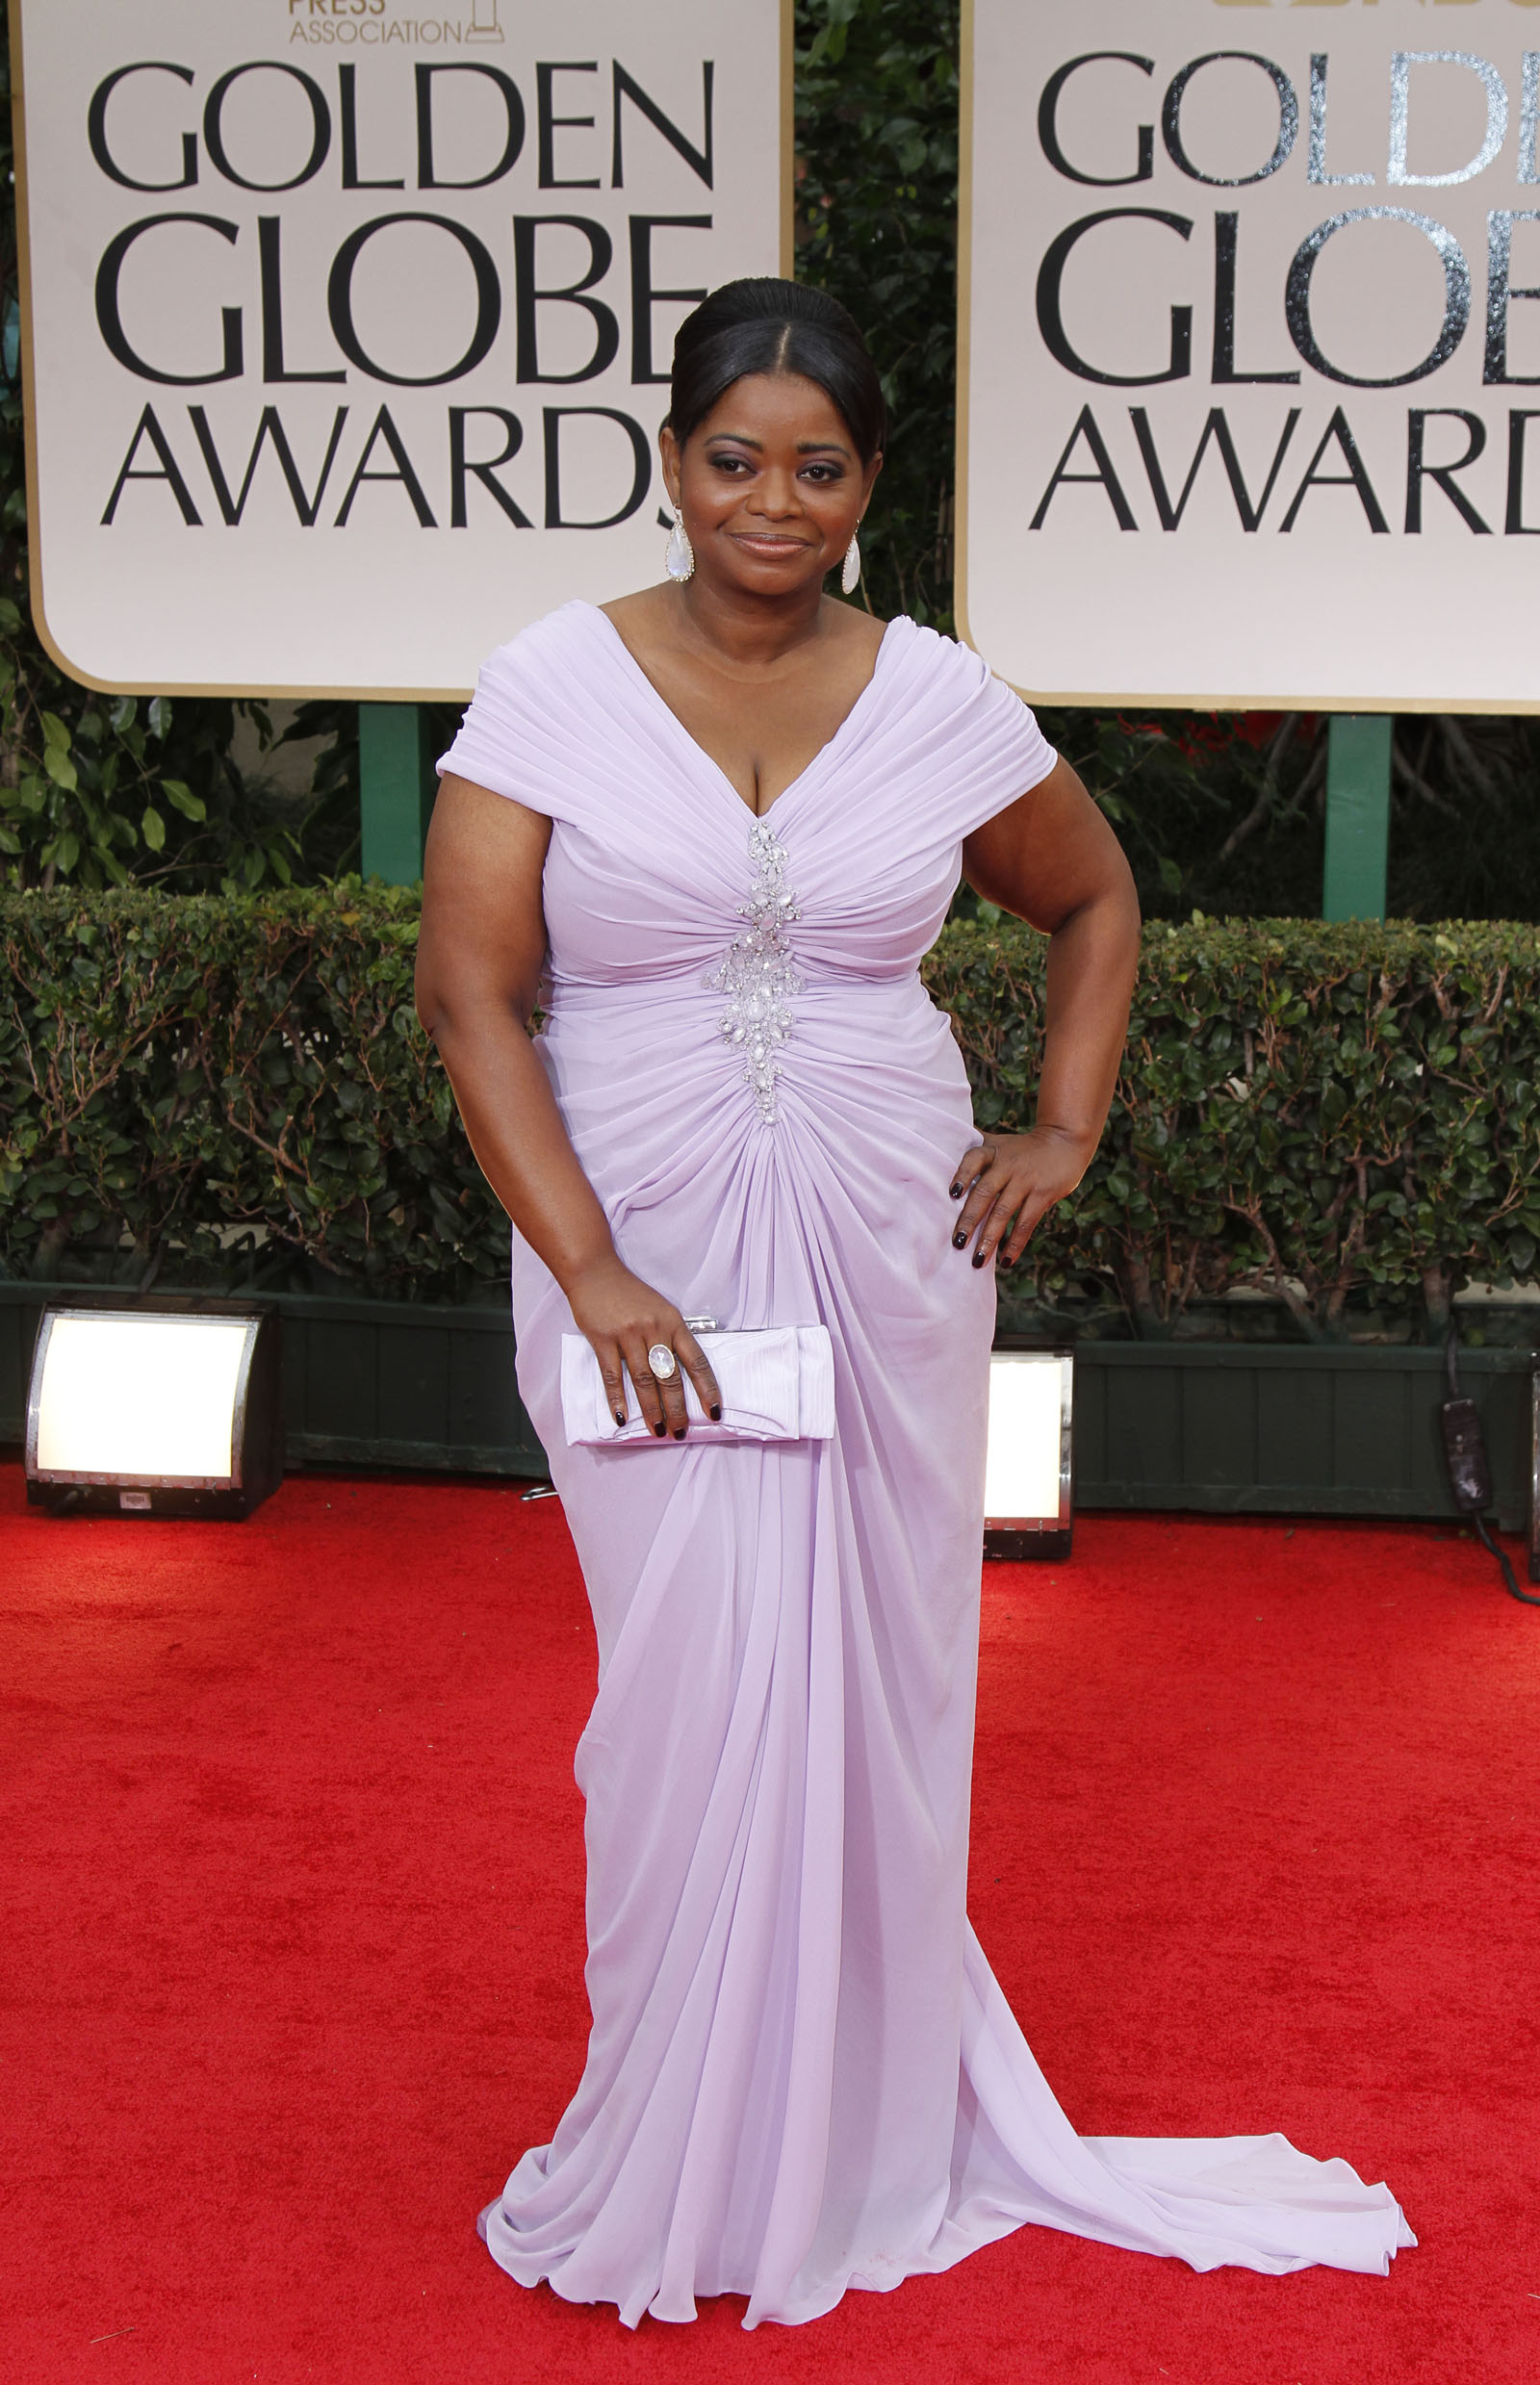 Octavia Spencer during coverage of the 69th Annual Golden Globe Awards show at The Beverly Hilton o